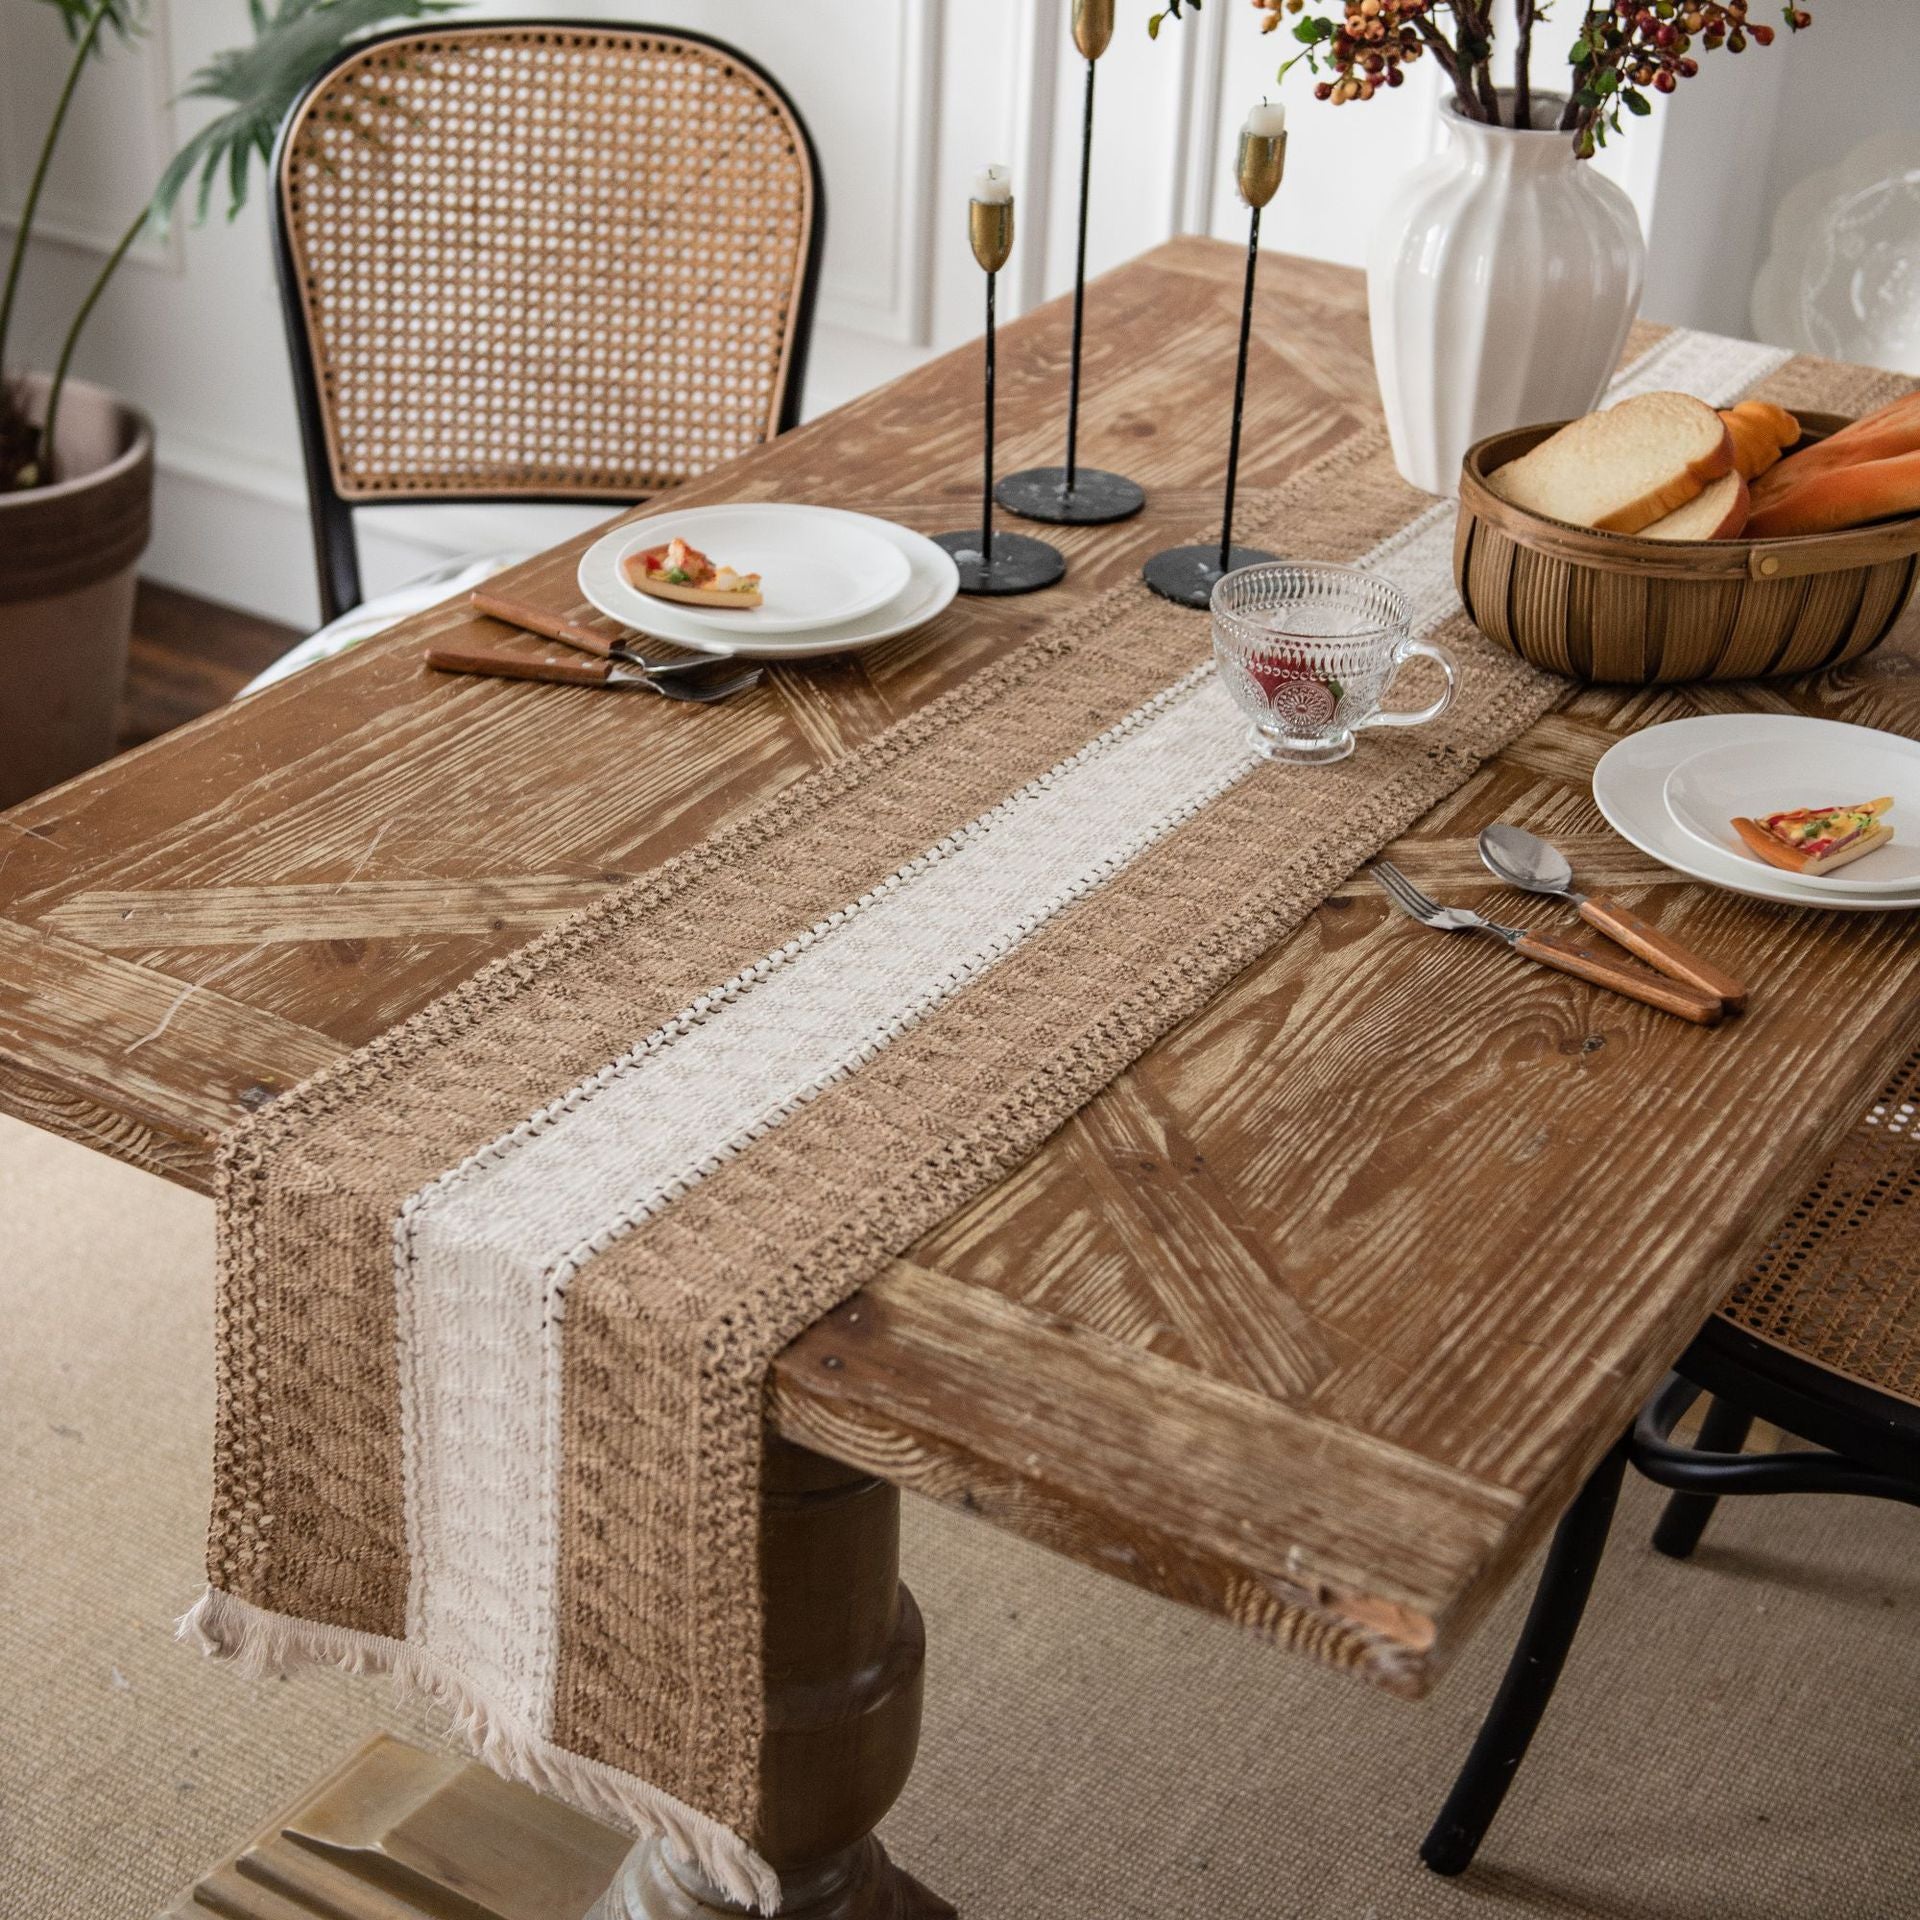 Cotton and linen striped patchwork Table Runners